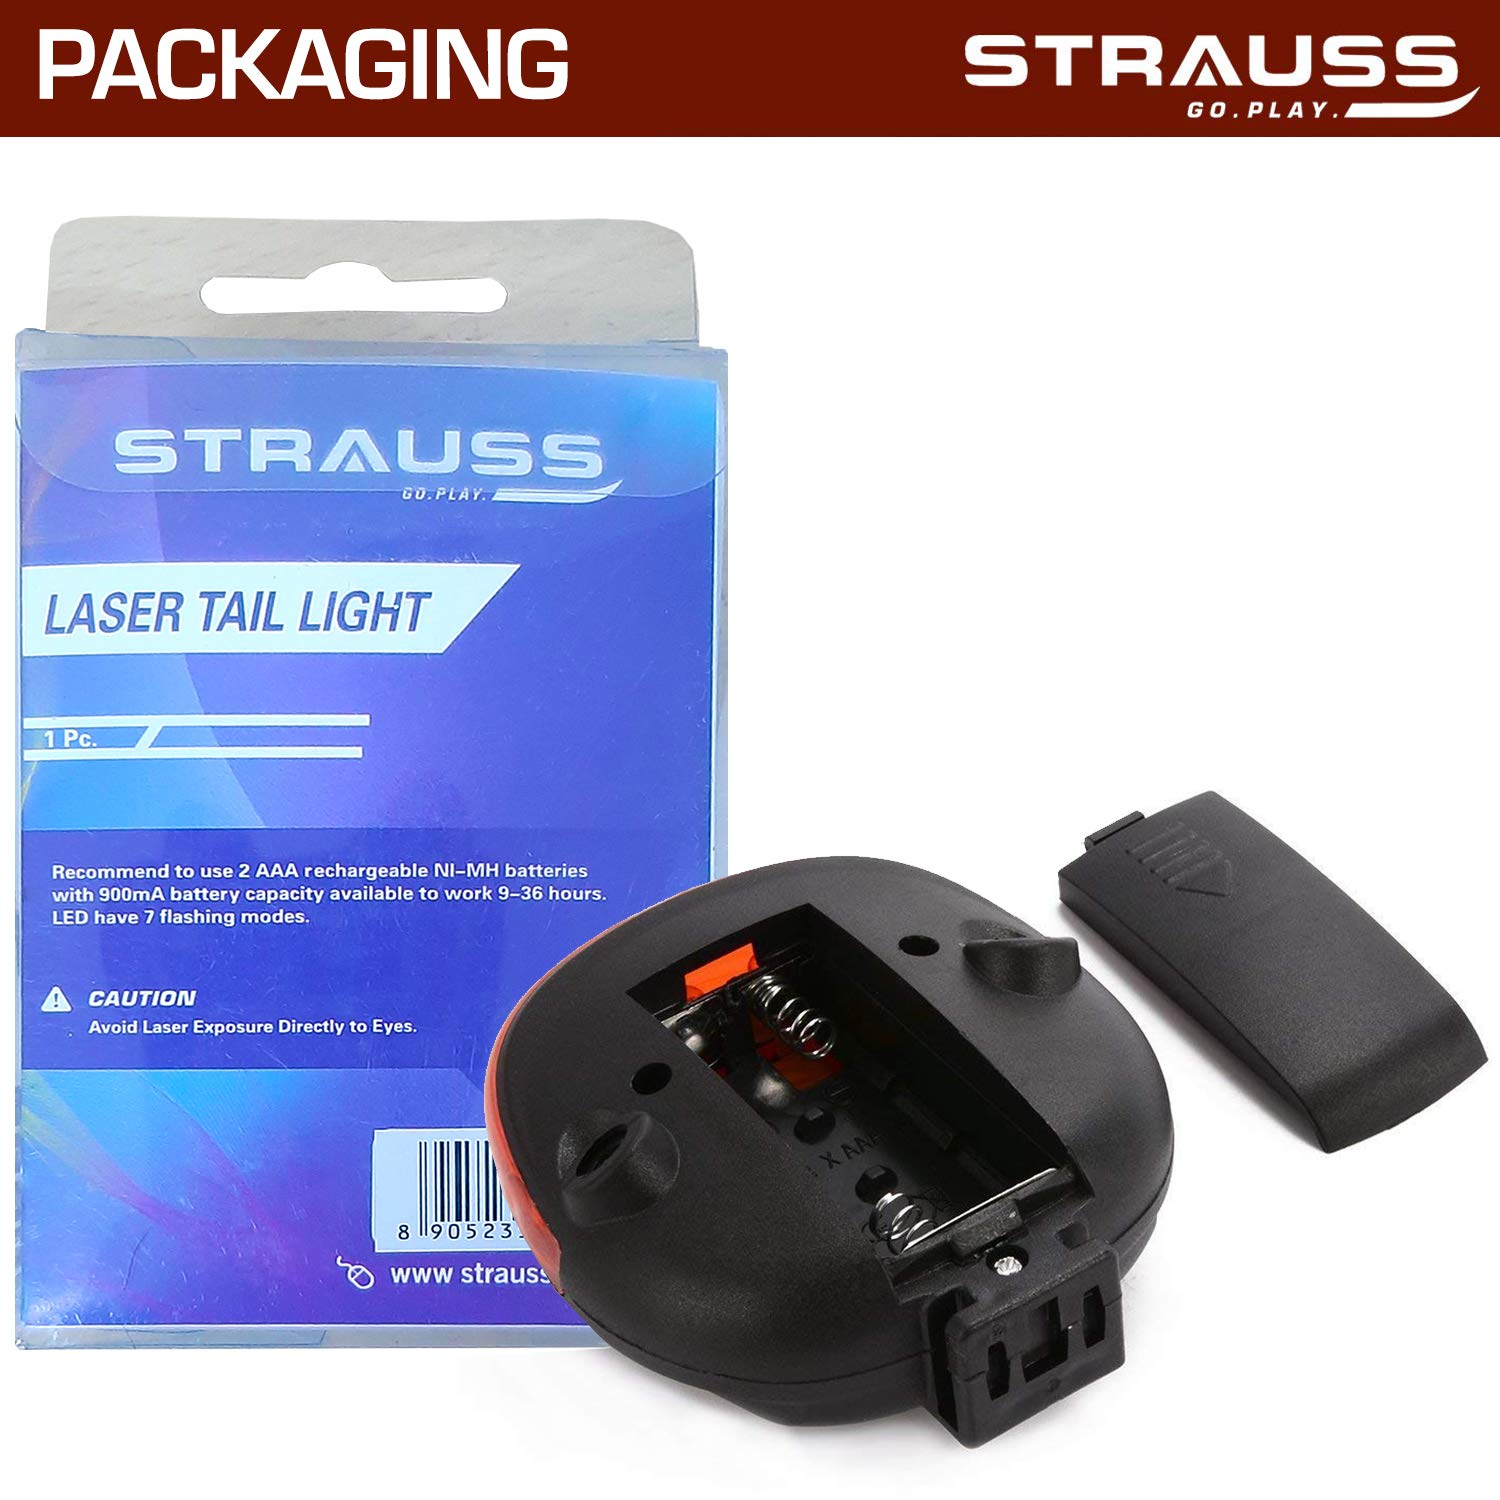 Strauss Bicycle Solar Tail Light and Bicycle Zoom LED Torch with Mount Holder